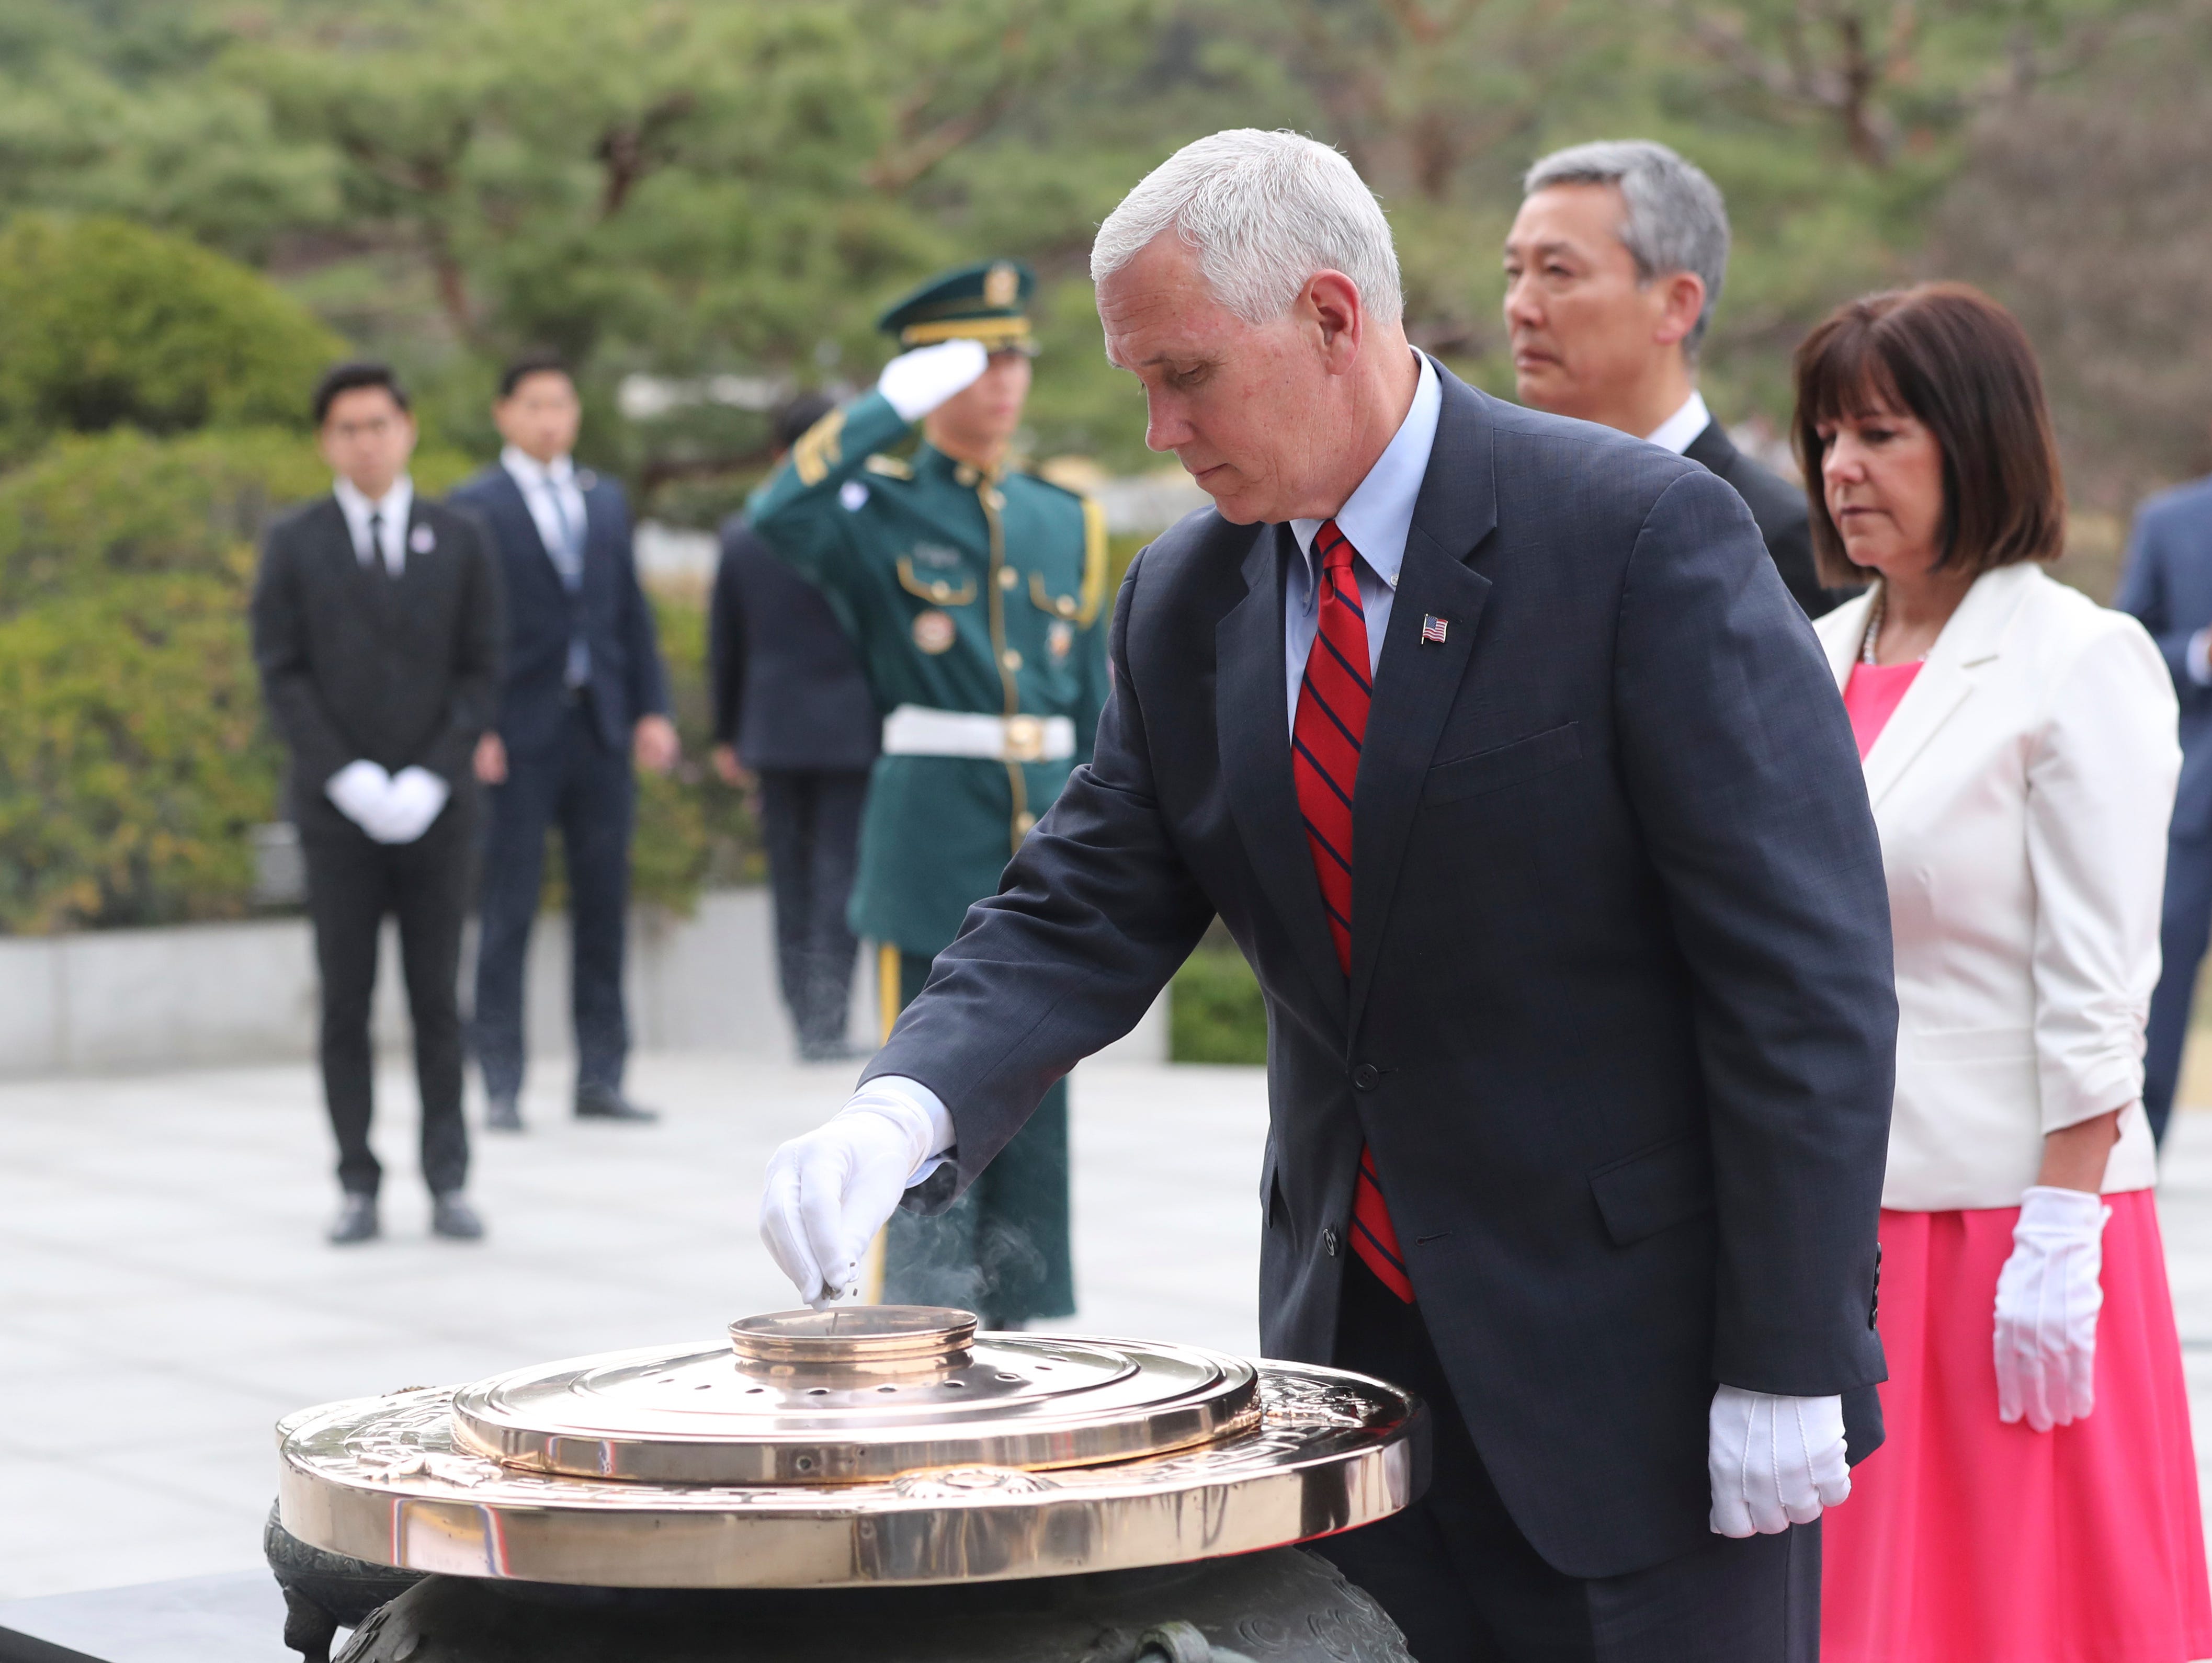 U.S. Vice President Mike Pence burns incense in front of his wife Karen Pence, right, at the Seoul National Cemetery in Seoul, South Korea, Sunday, April 16, 2017.